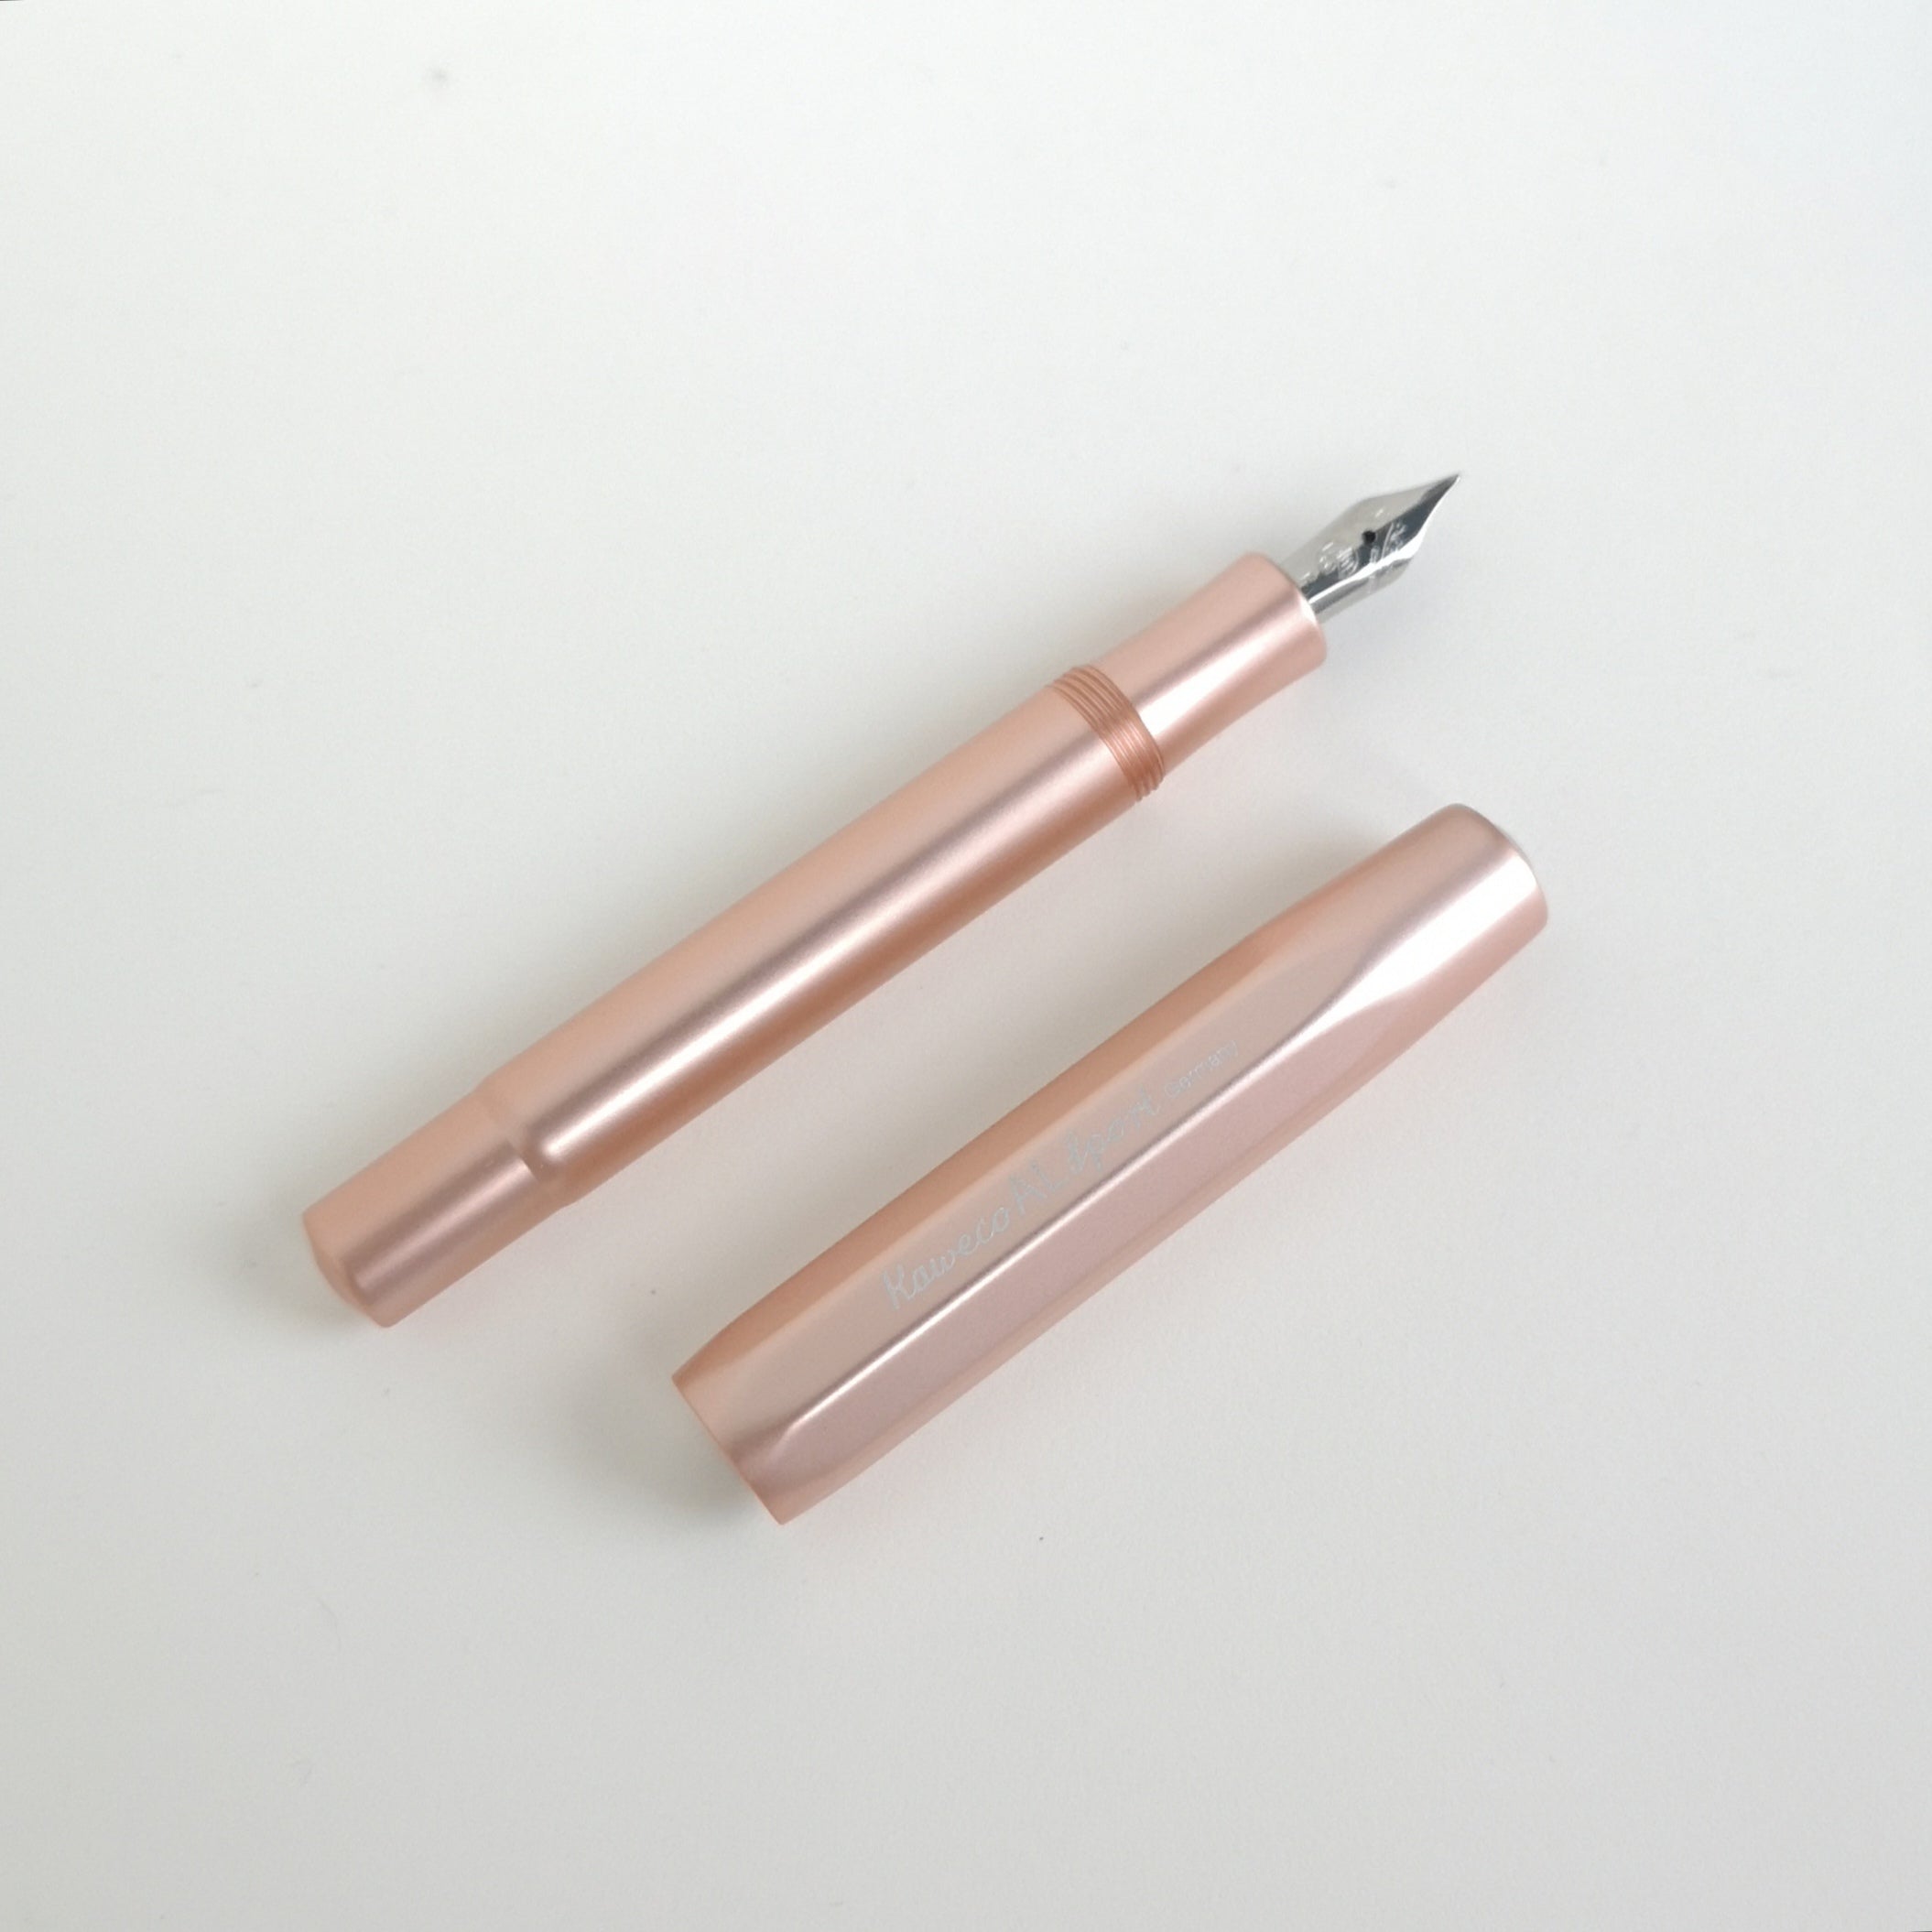 Kaweco Rose Gold Aluminium Fountain Pen with cap by side